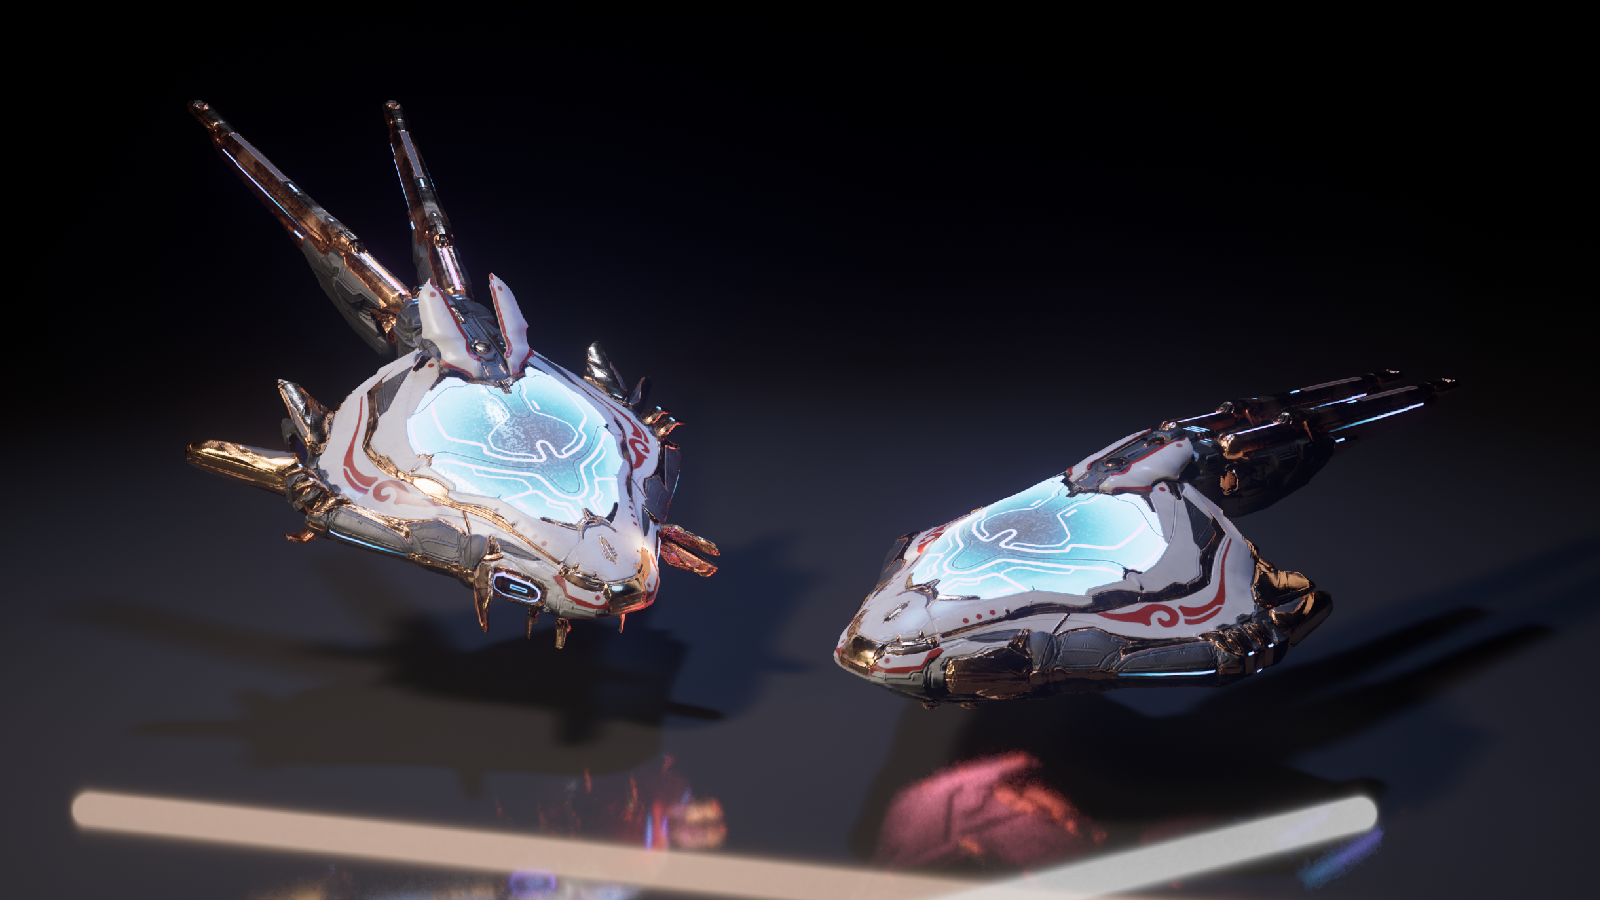 Imagine being one of those suckers who spent so many dollars for that Liset ...